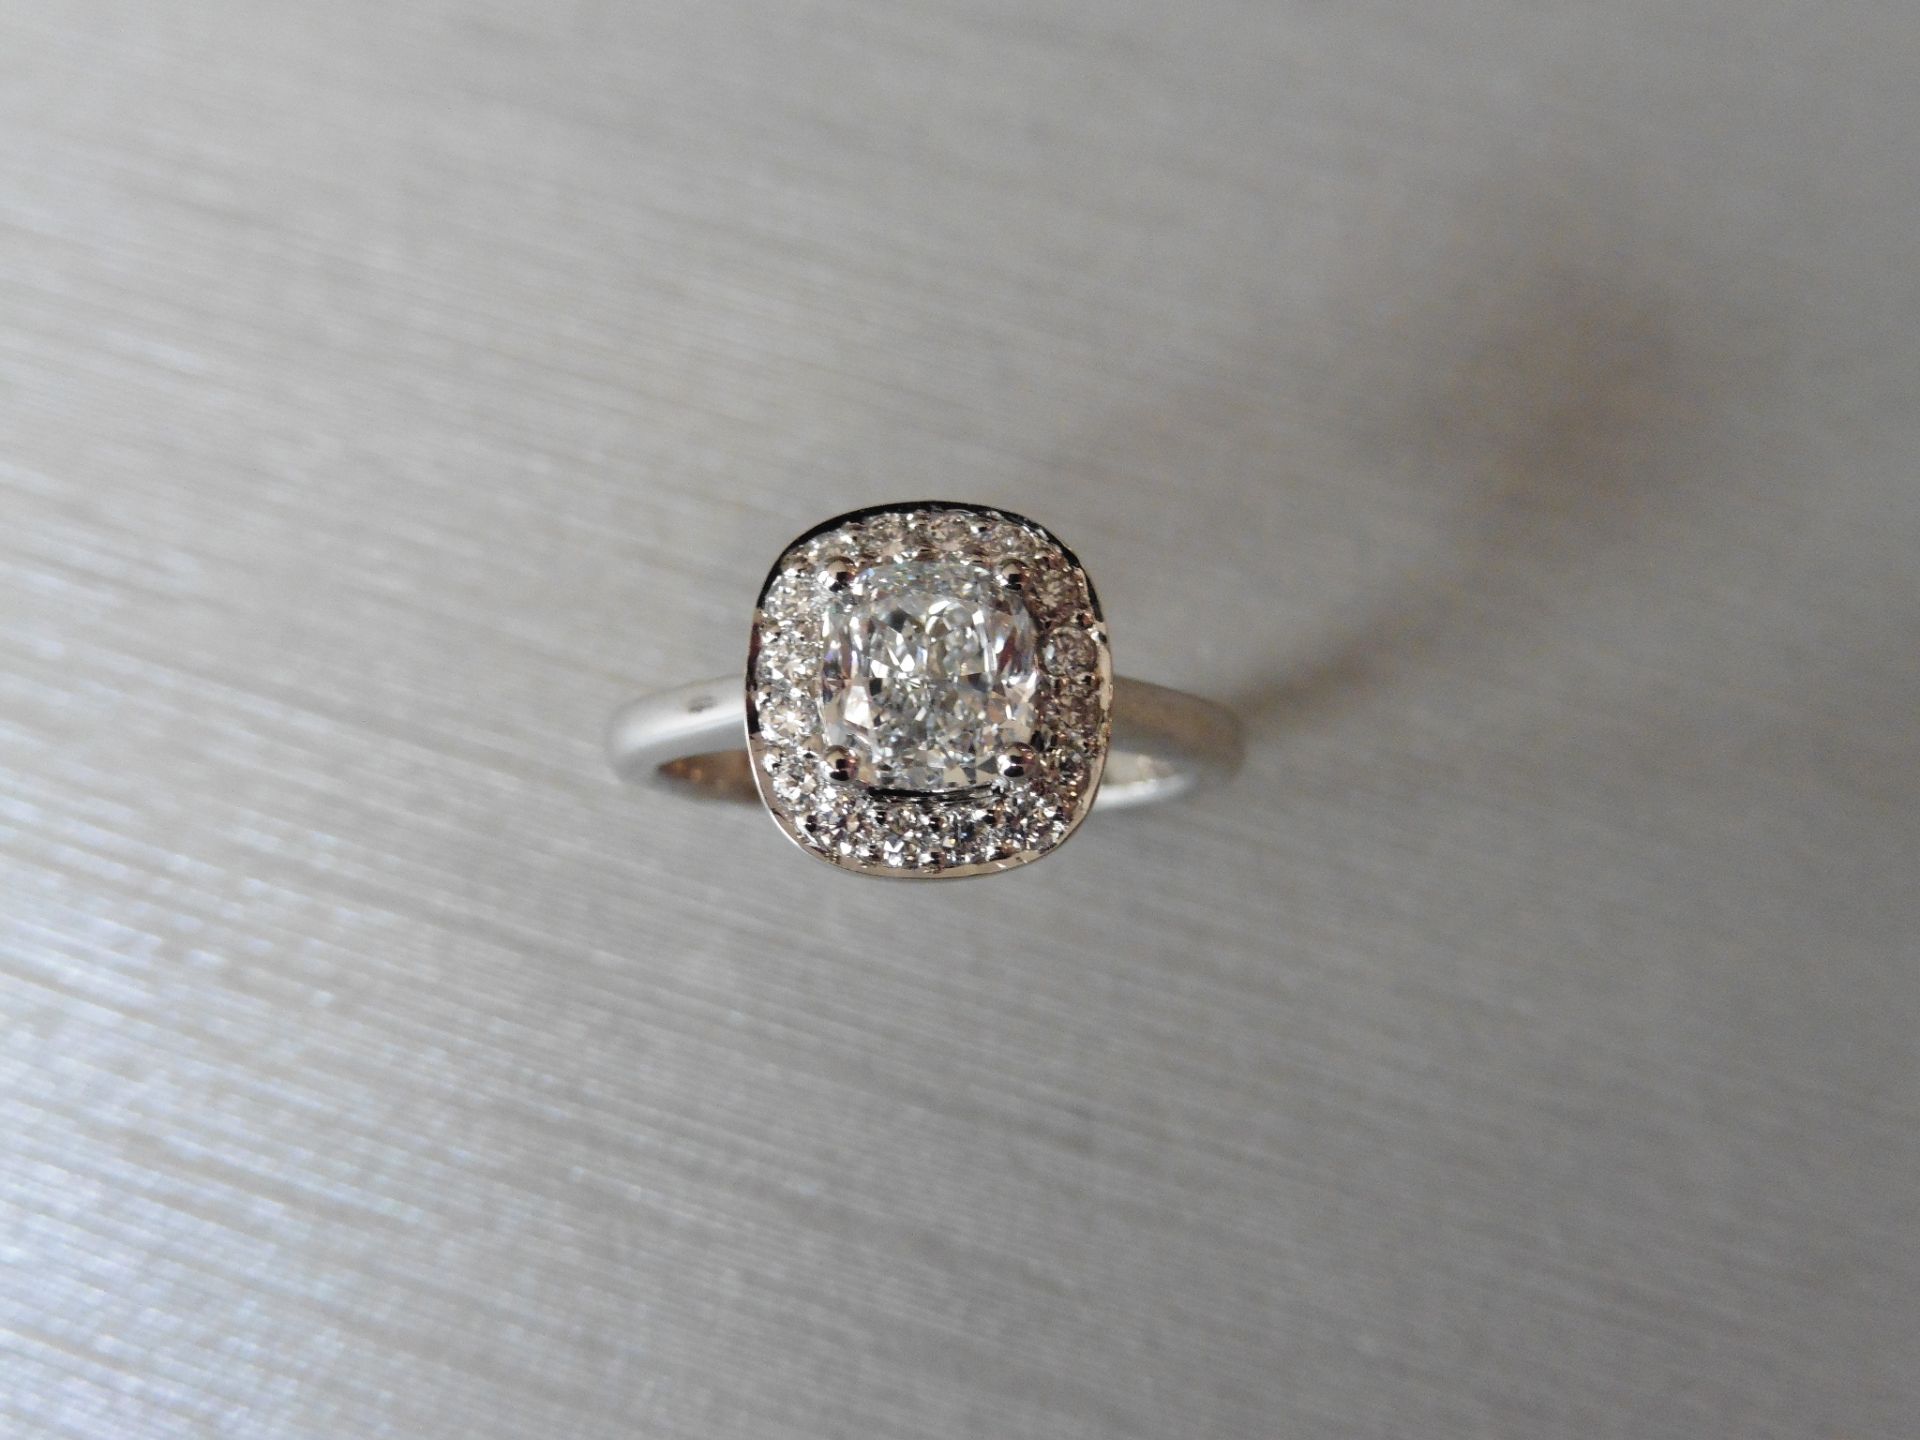 Platinum diamond set solitaire ring set with a 1.20ct cushion cut diamond, D colour and VS2 clarity. - Image 6 of 7